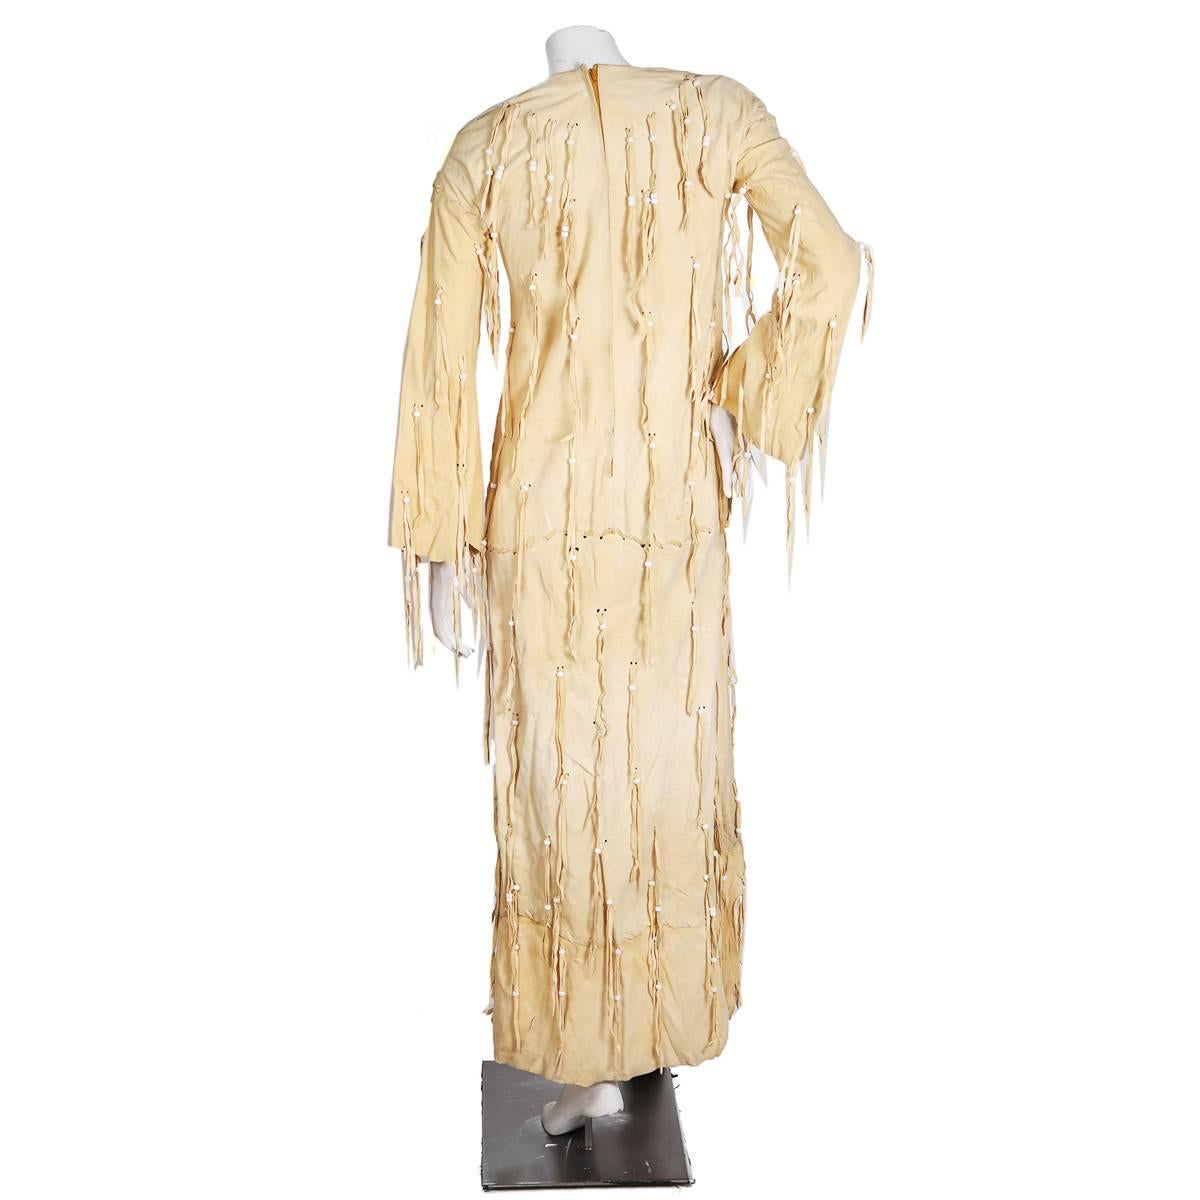 Dress by Giorgio Sant' Angelo circa 1960s/1970s
Beige suede covered in suede string and white bead fringe
Empire waist fit
Condition: Great vintage condition, with some expected but minor wear to the suede due to its age

Size/Measurements:
36